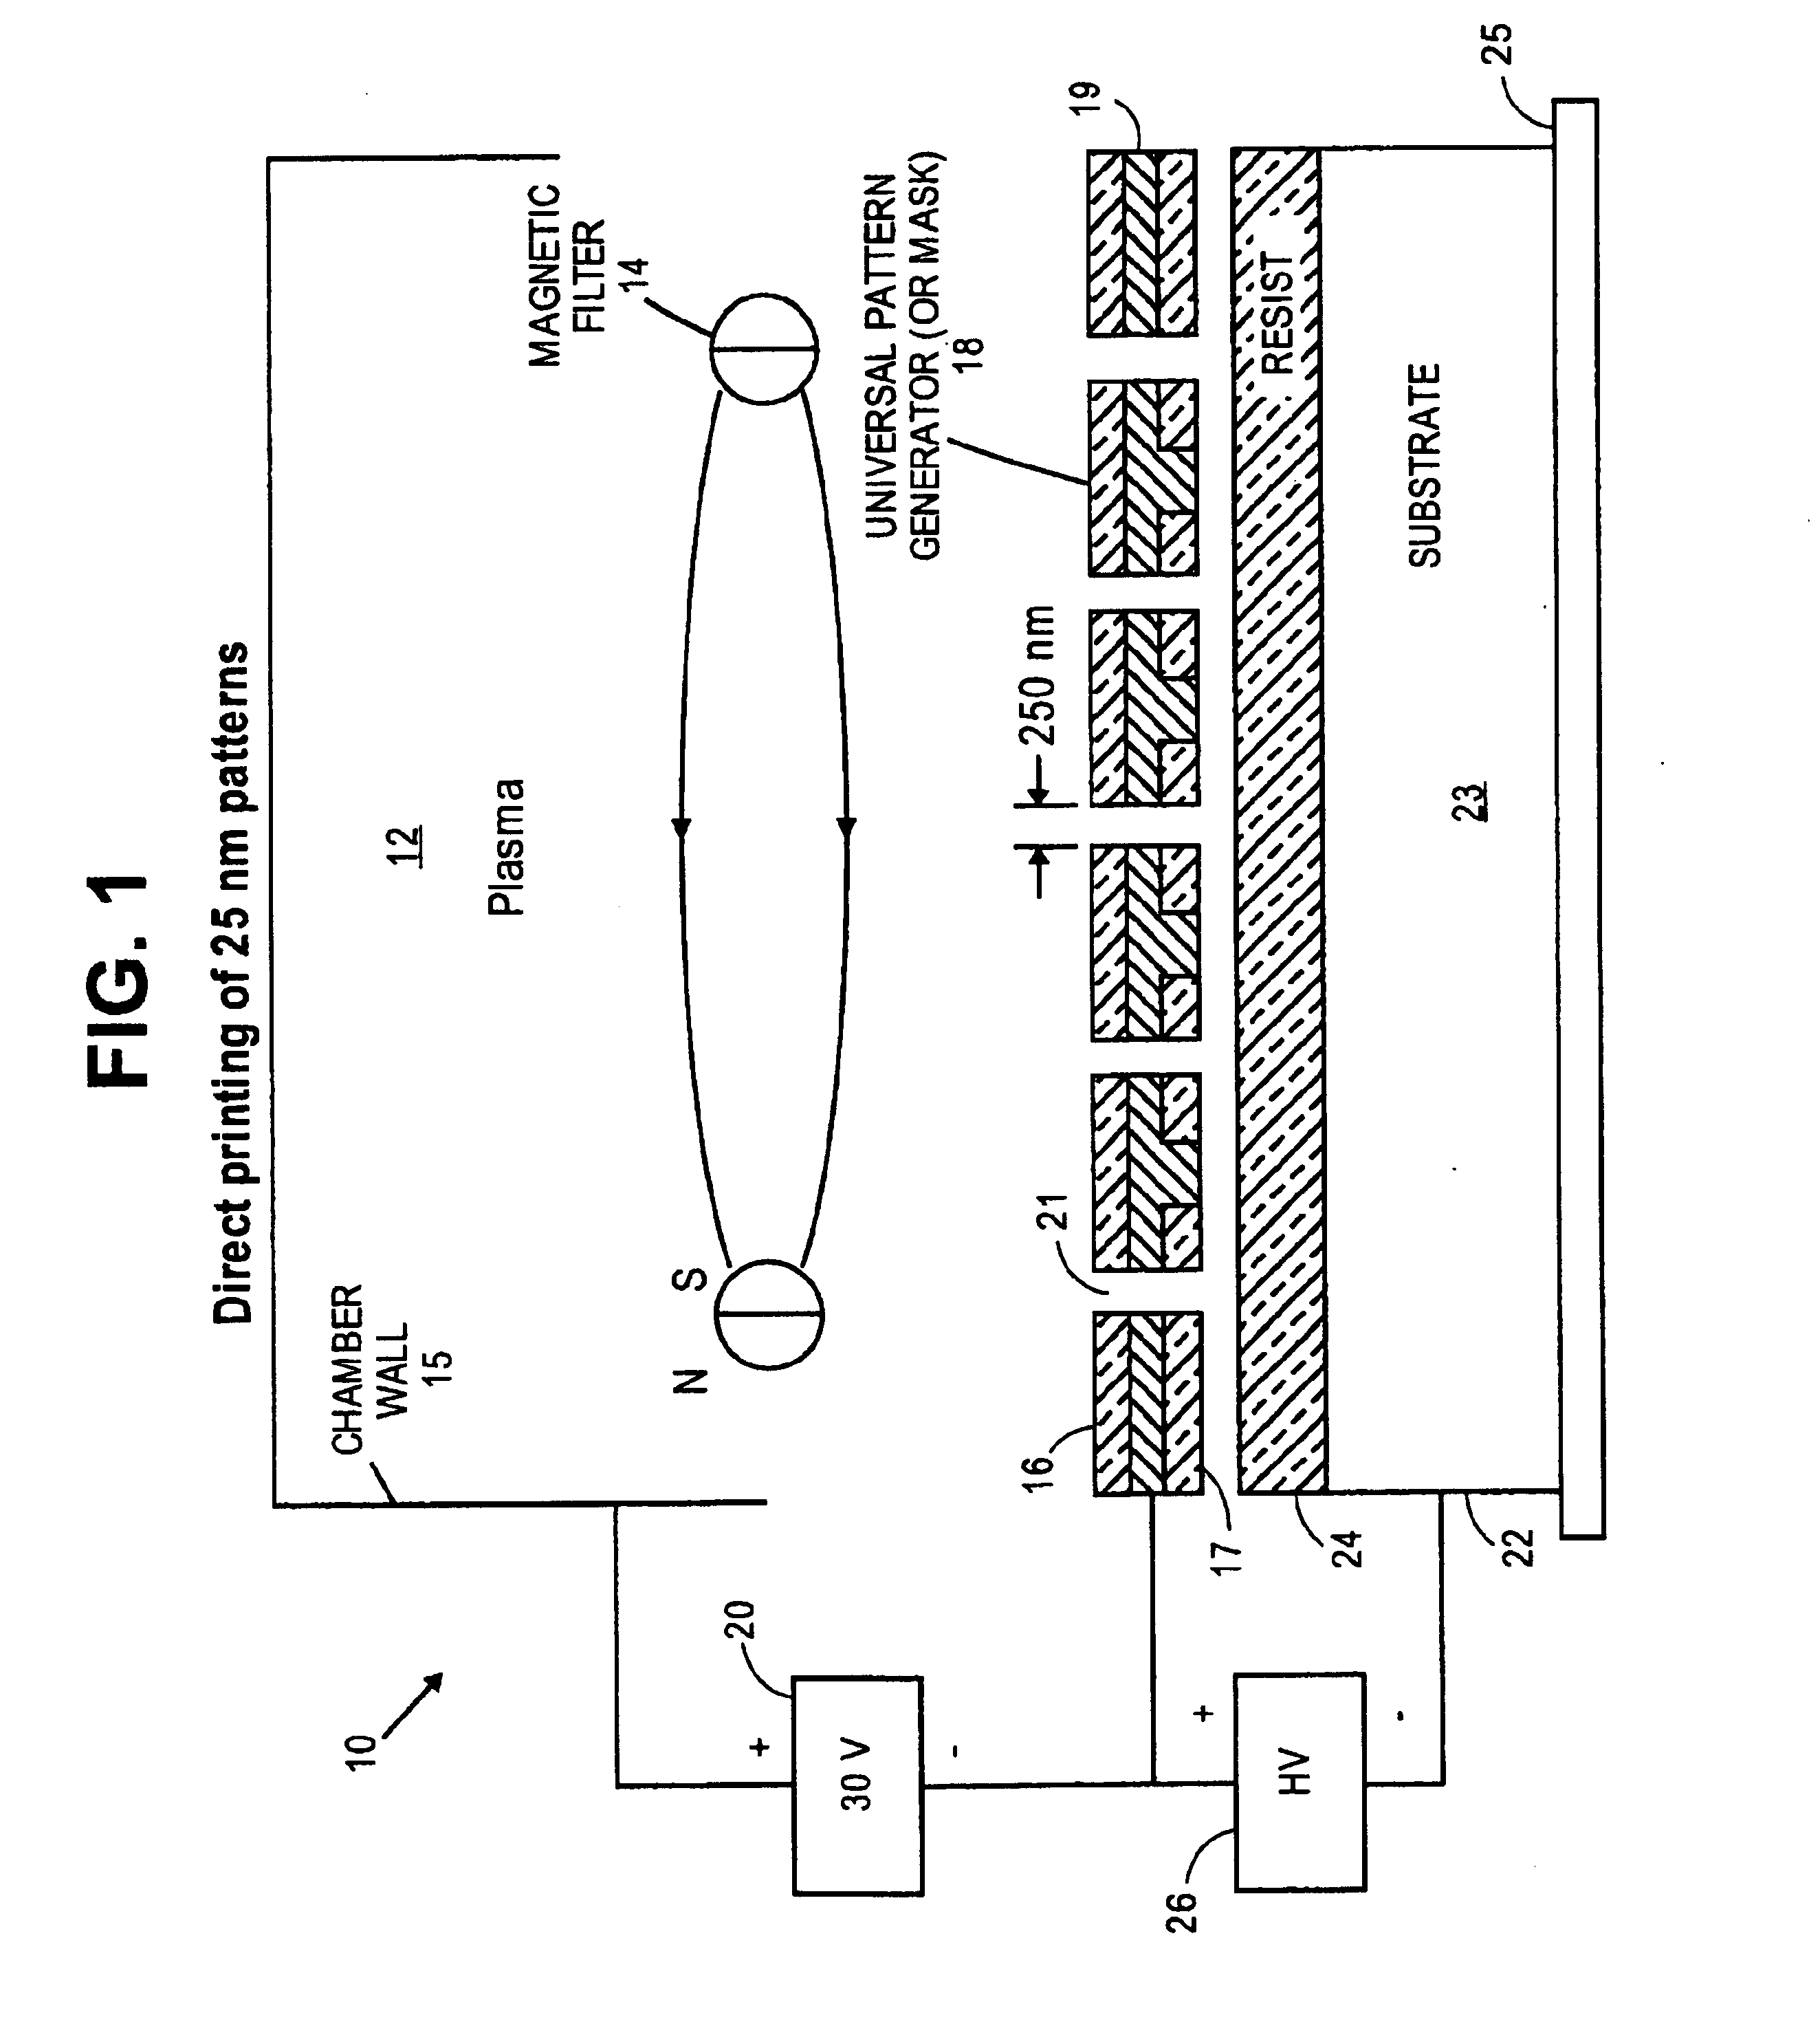 Ion beam lithography system